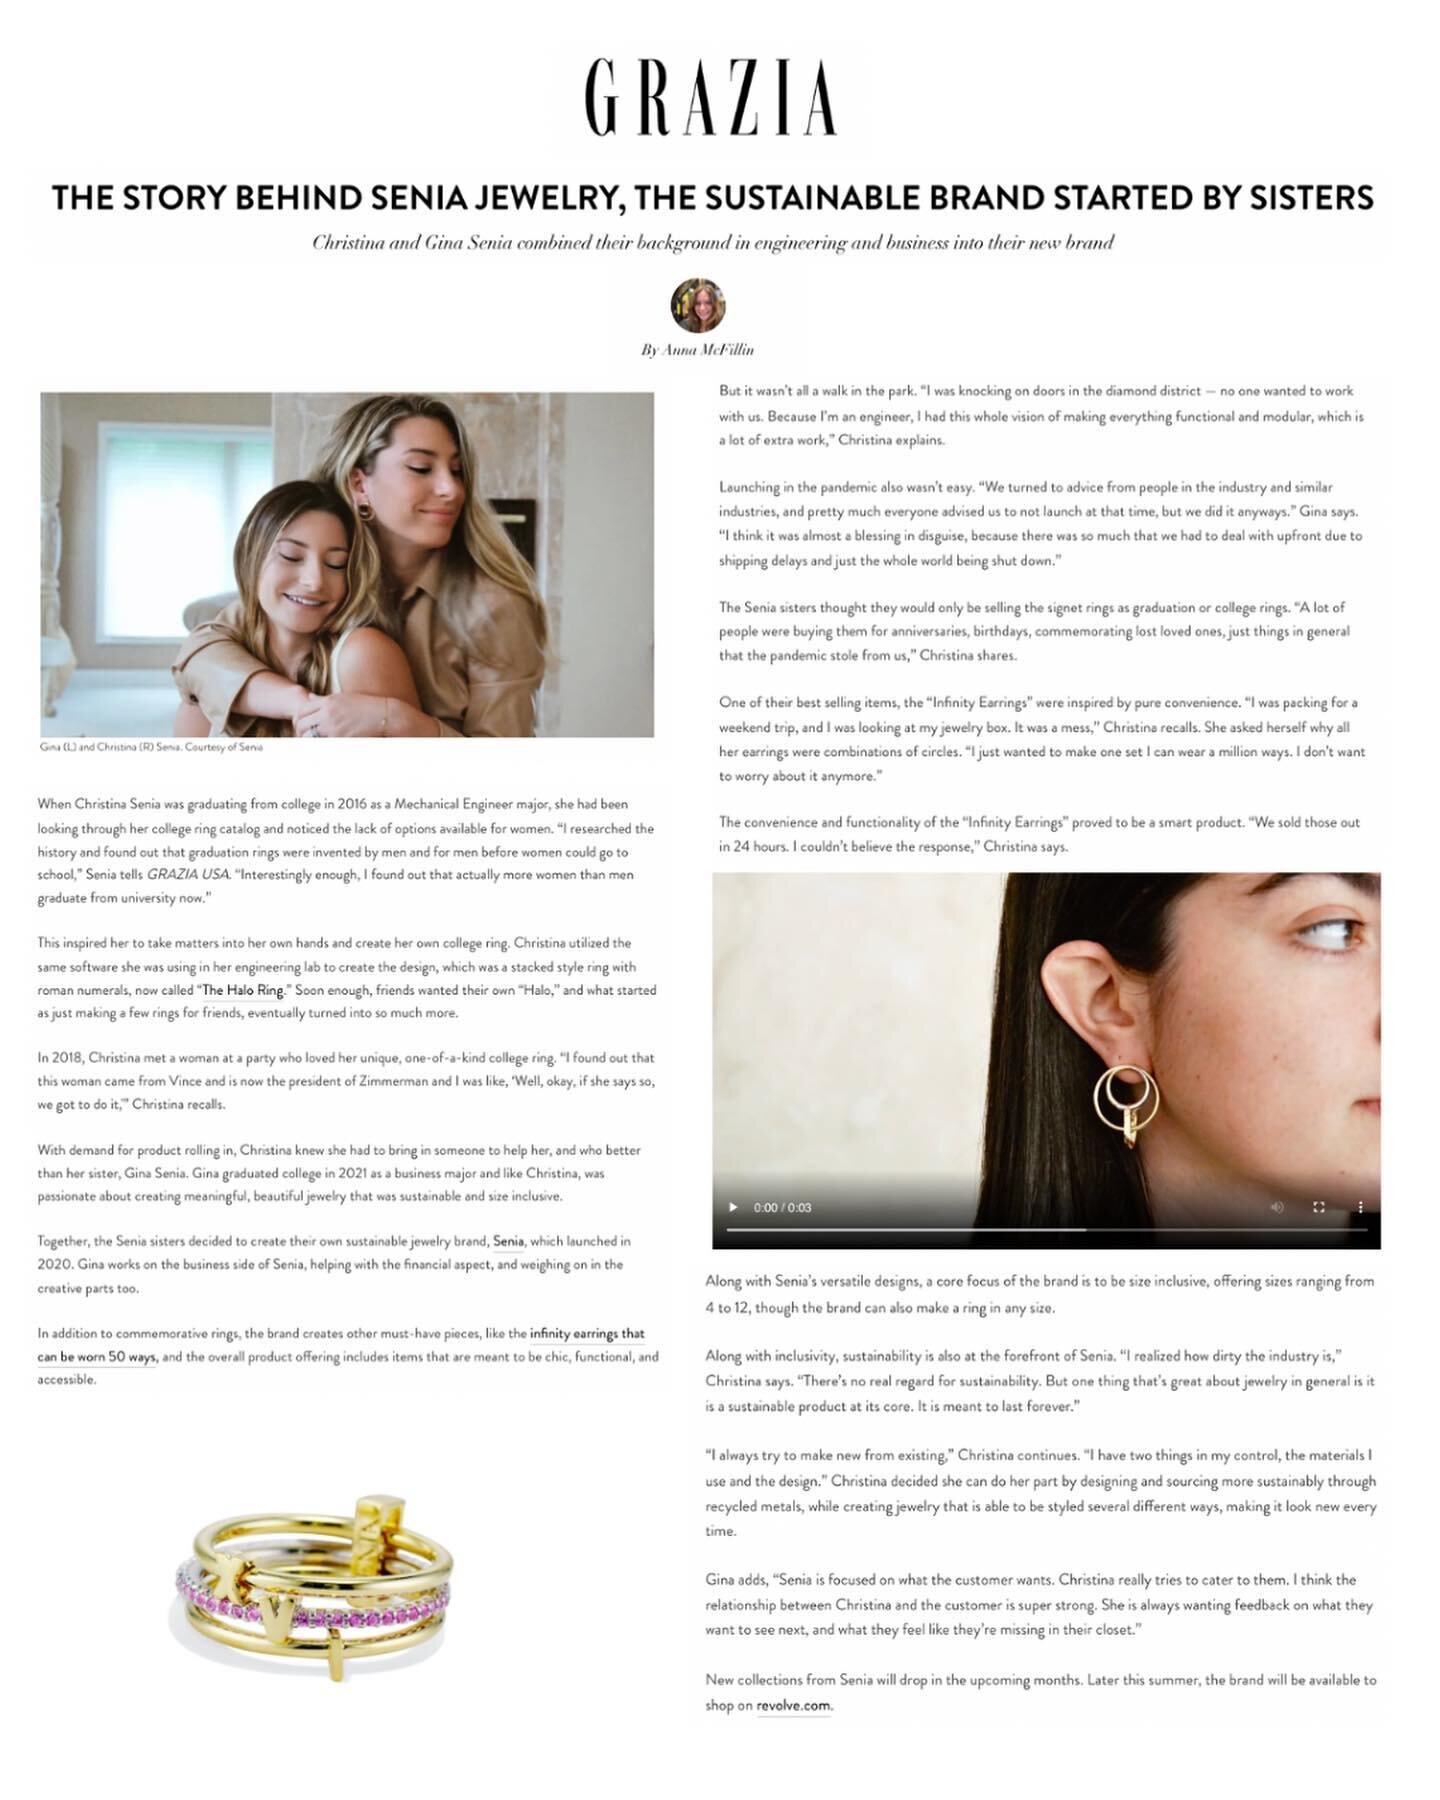 A Fine Line - Sustainability and inclusivity should extend to every category including demi-fine jewelry.  @senianewyork sisters and founders, @christinasenia and @ggsenia, talk to @whatztheyamz about their continued efforts with @graziausa #sustaina